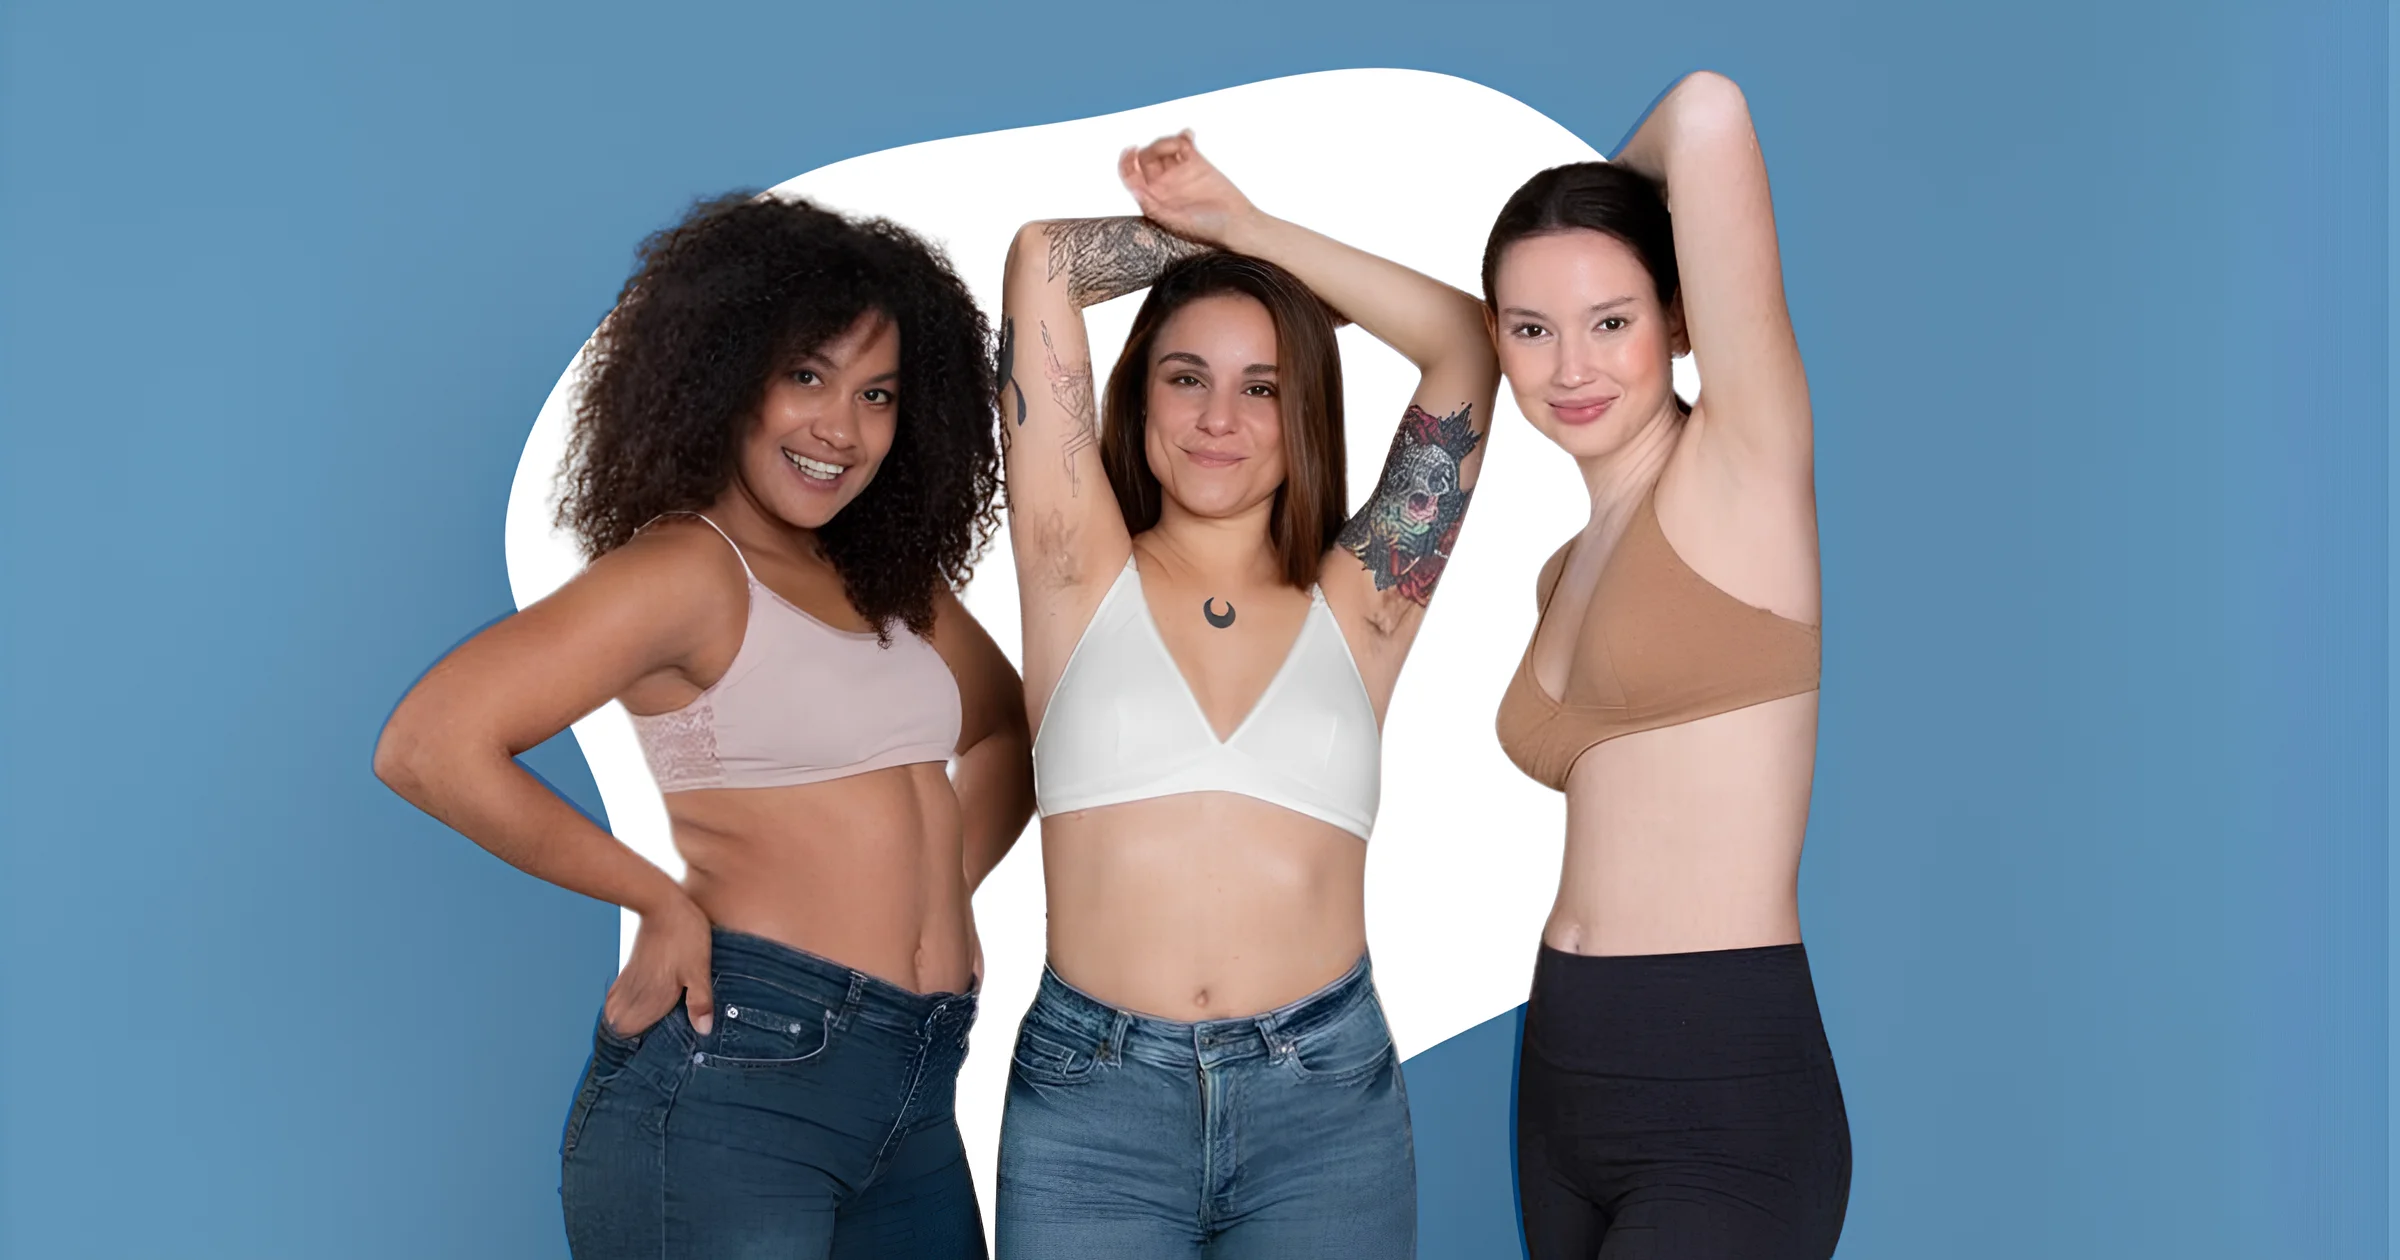 How To Find The Right Bra For Your Body Type